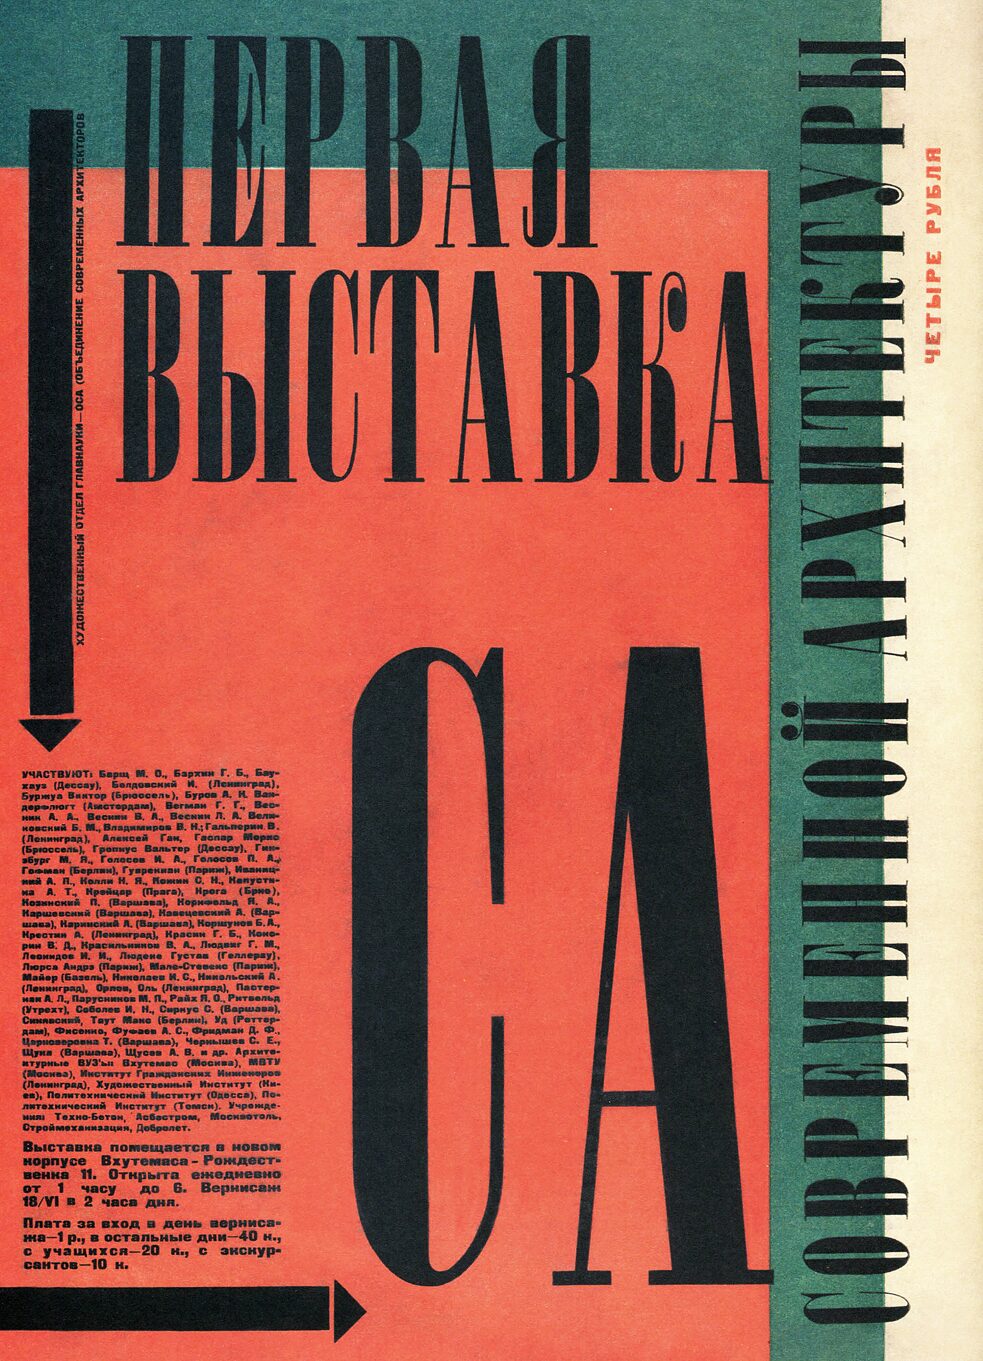 Poster for the First Exhibition of Modern Architecture in Moscow | A. Gan, 1927